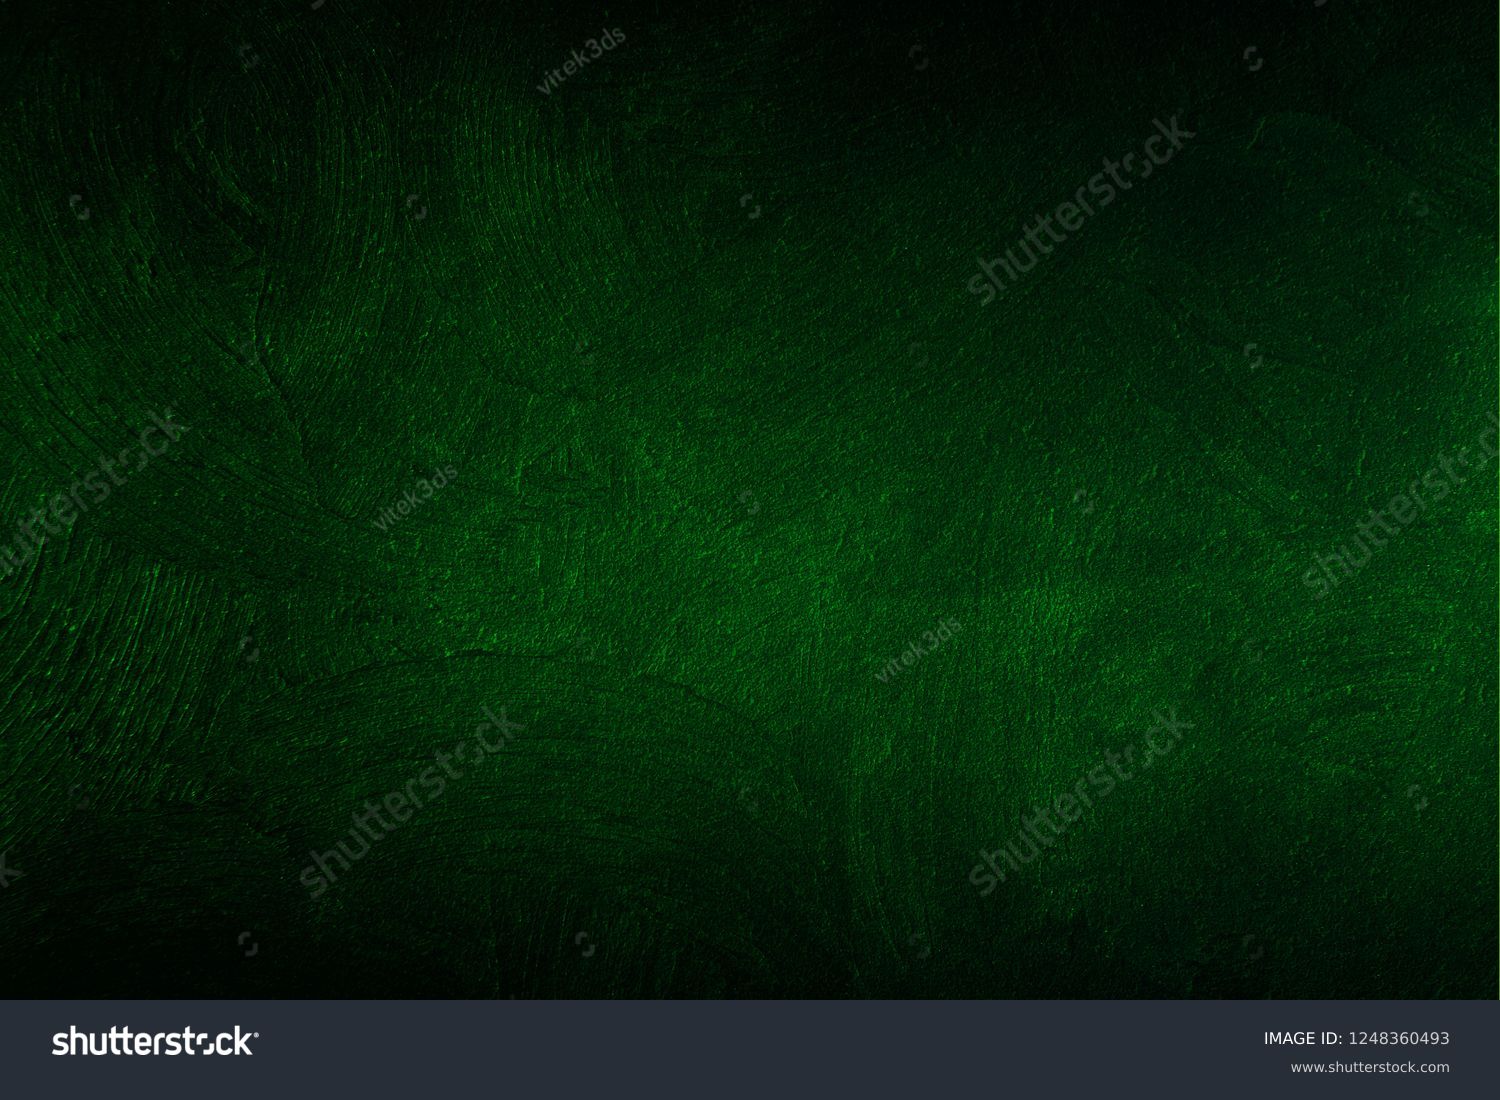 Dark green wall texture for designer background. Artistic plaster. Rough lighted surface. Abstract pattern. Bright backdrop. Raster image. #1248360493